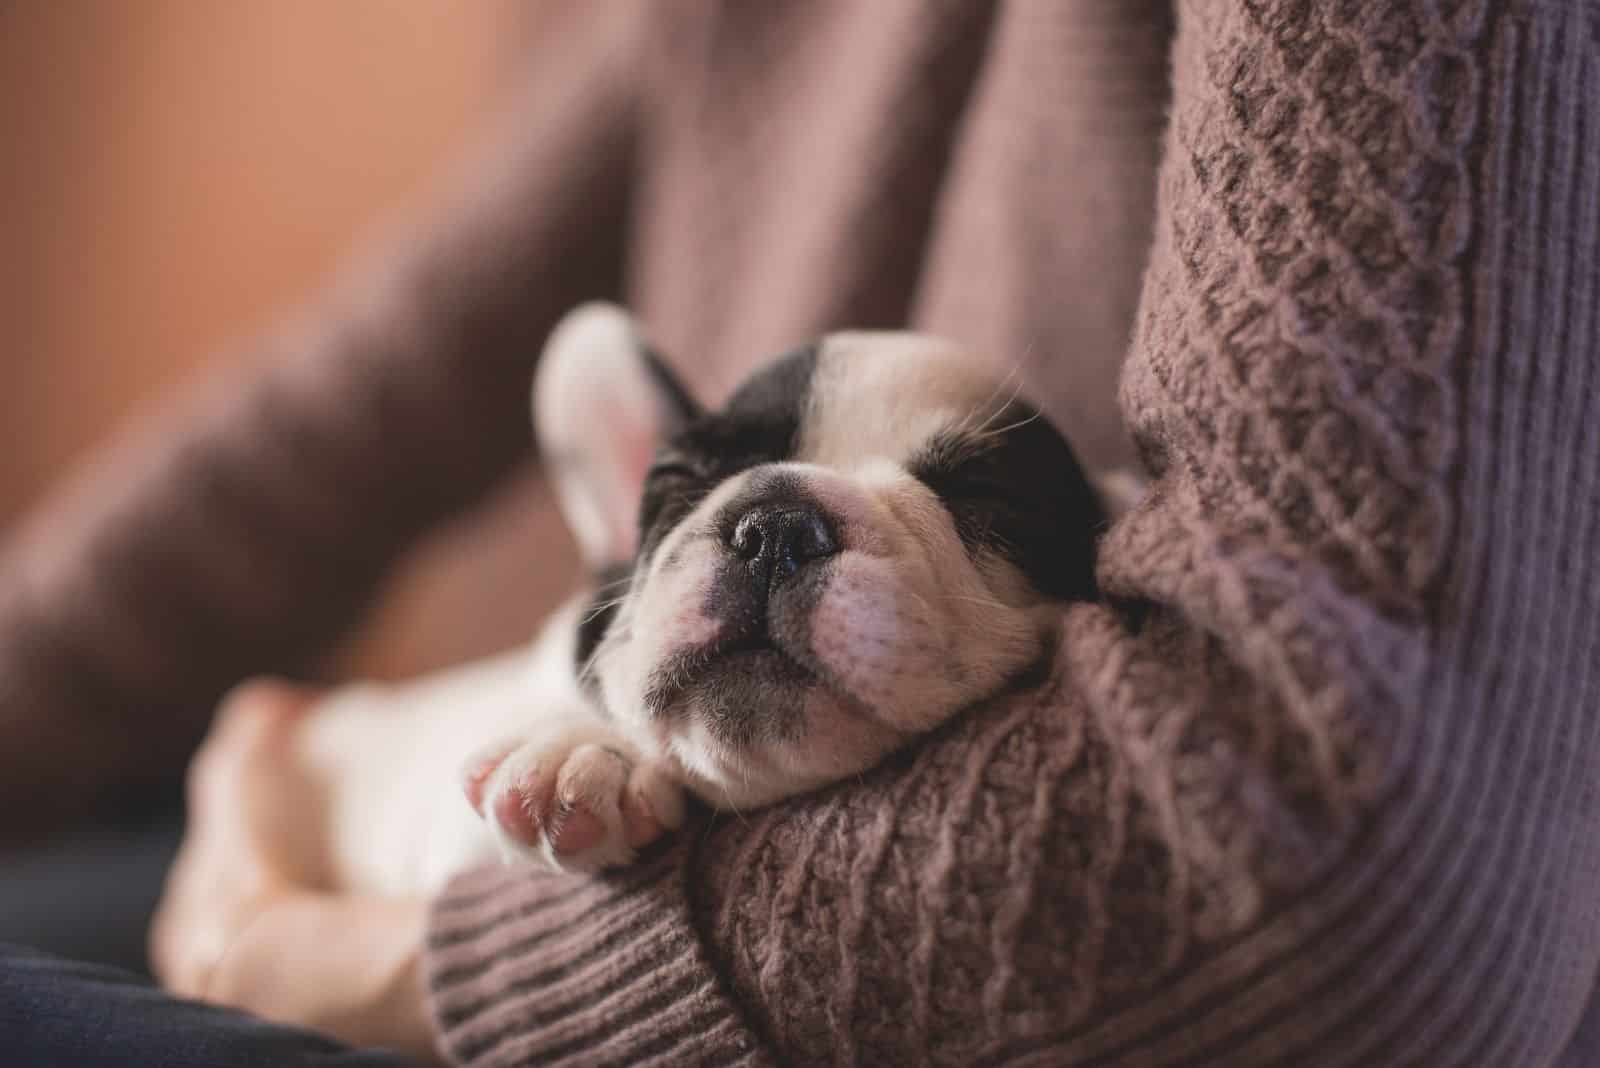 puppy sleeping in the arms of a person in cropped image